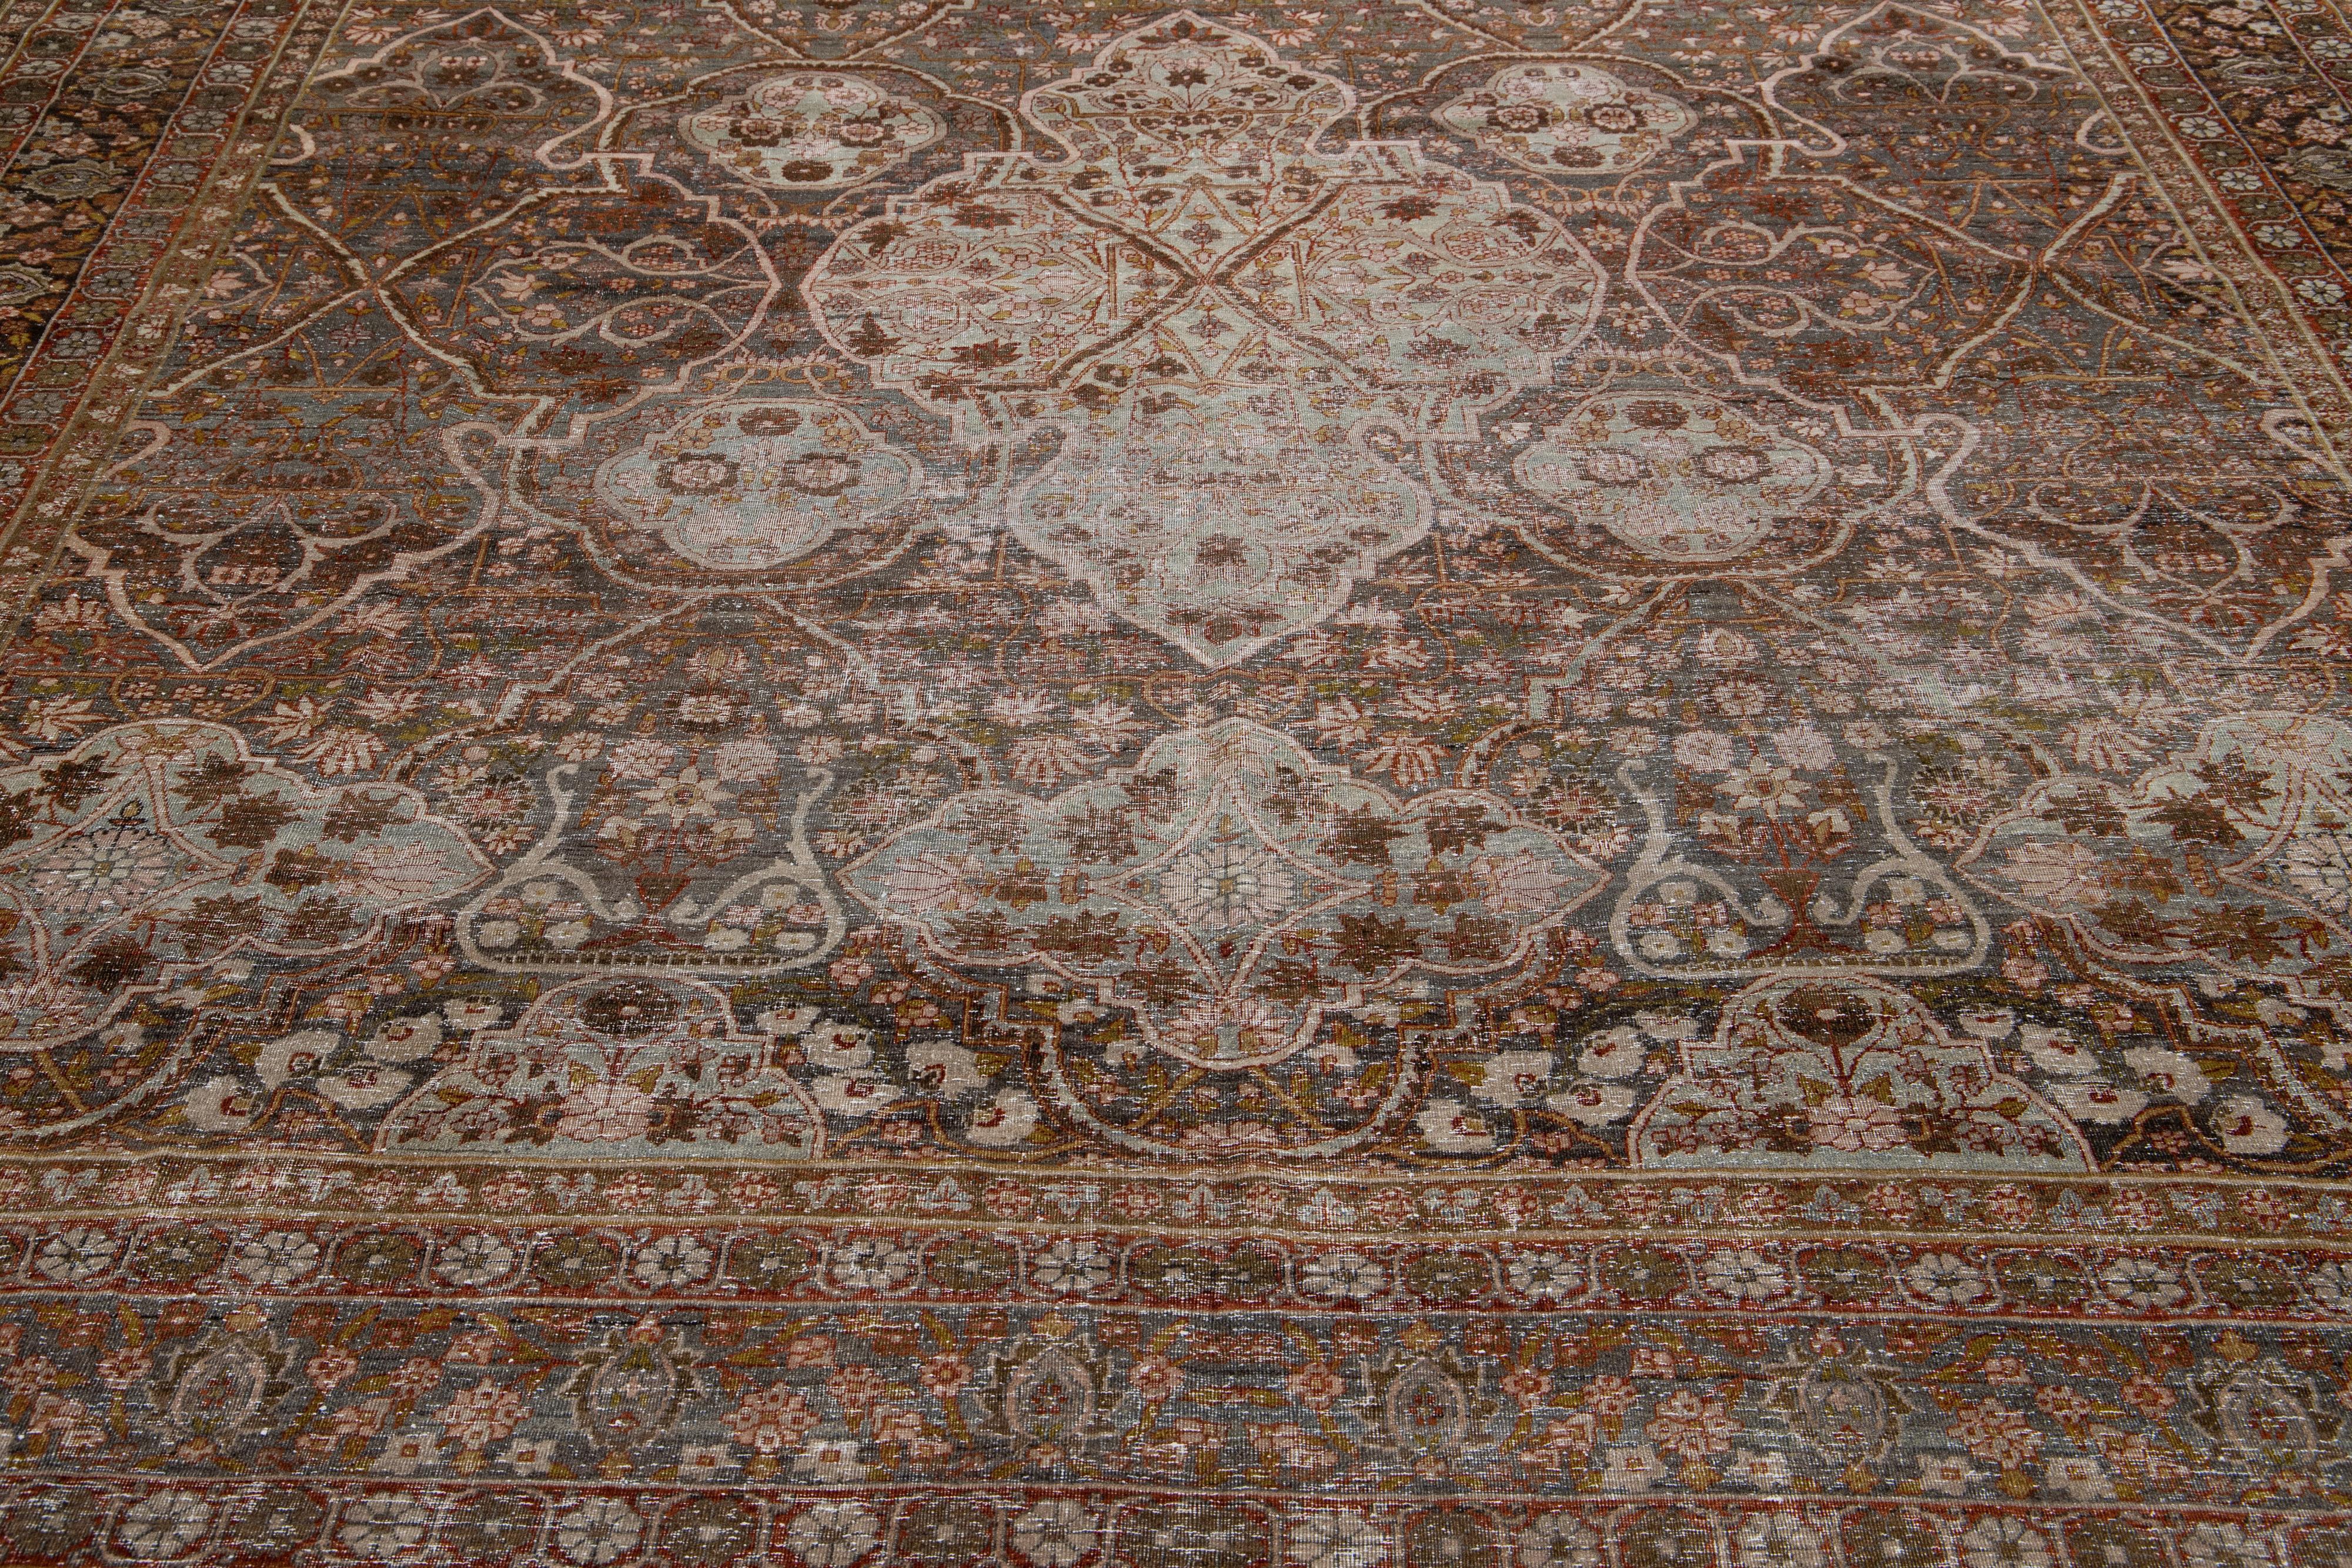 This antique Tabriz rug boasts a gray field and features exquisite, hand knotted wool construction complemented by hints of red, goldenrod, and beige in an all-over floral pattern. This unique craftsmanship is durable and timeless so it can be